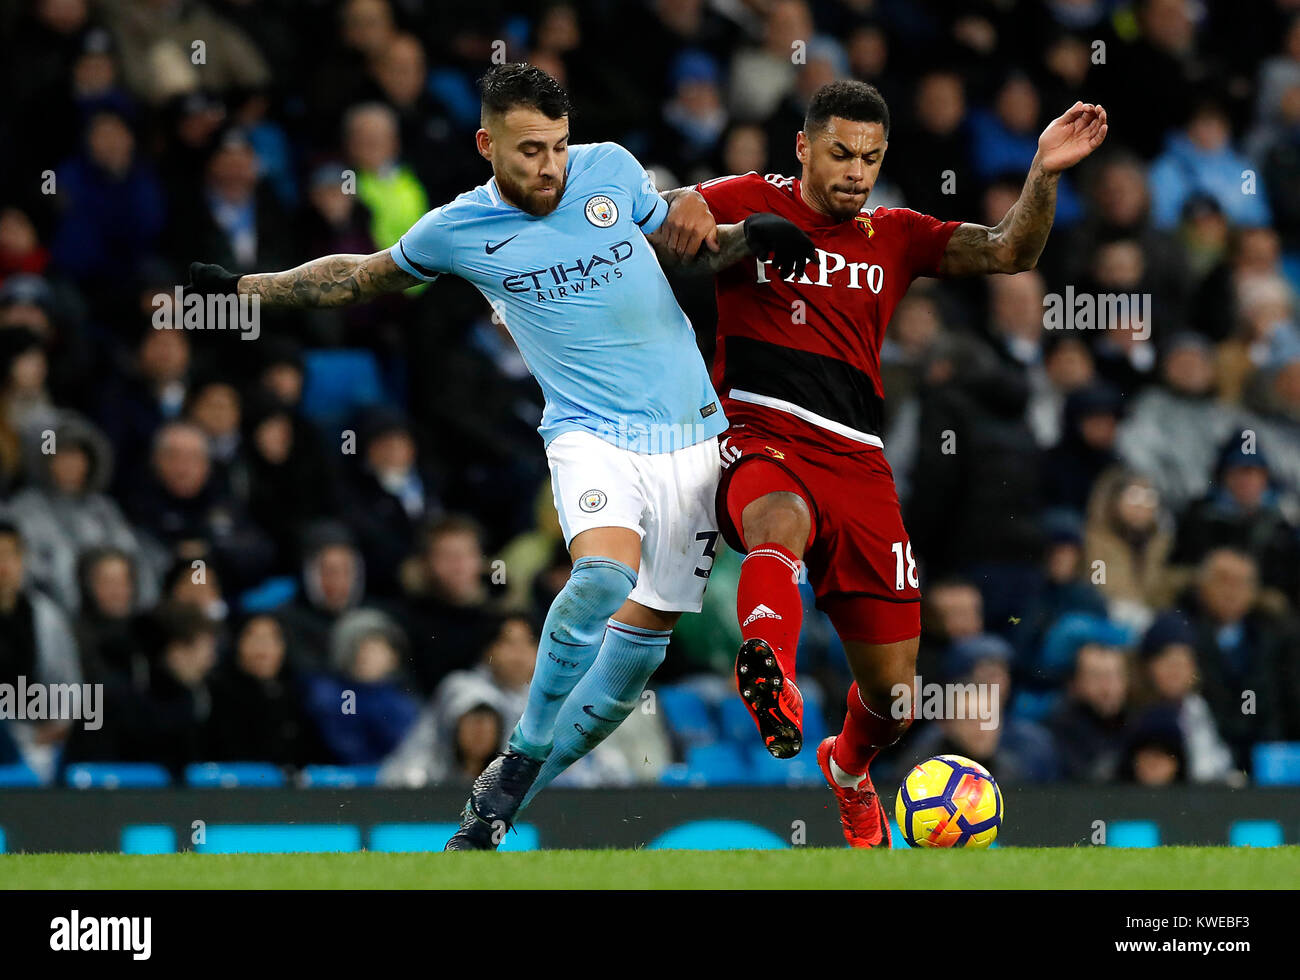 Manchester City's Nicolas Otamendi (left) and Watford's Andre Gray (right) battle for the ball during the Premier League match at the Etihad Stadium, Manchester. Stock Photo